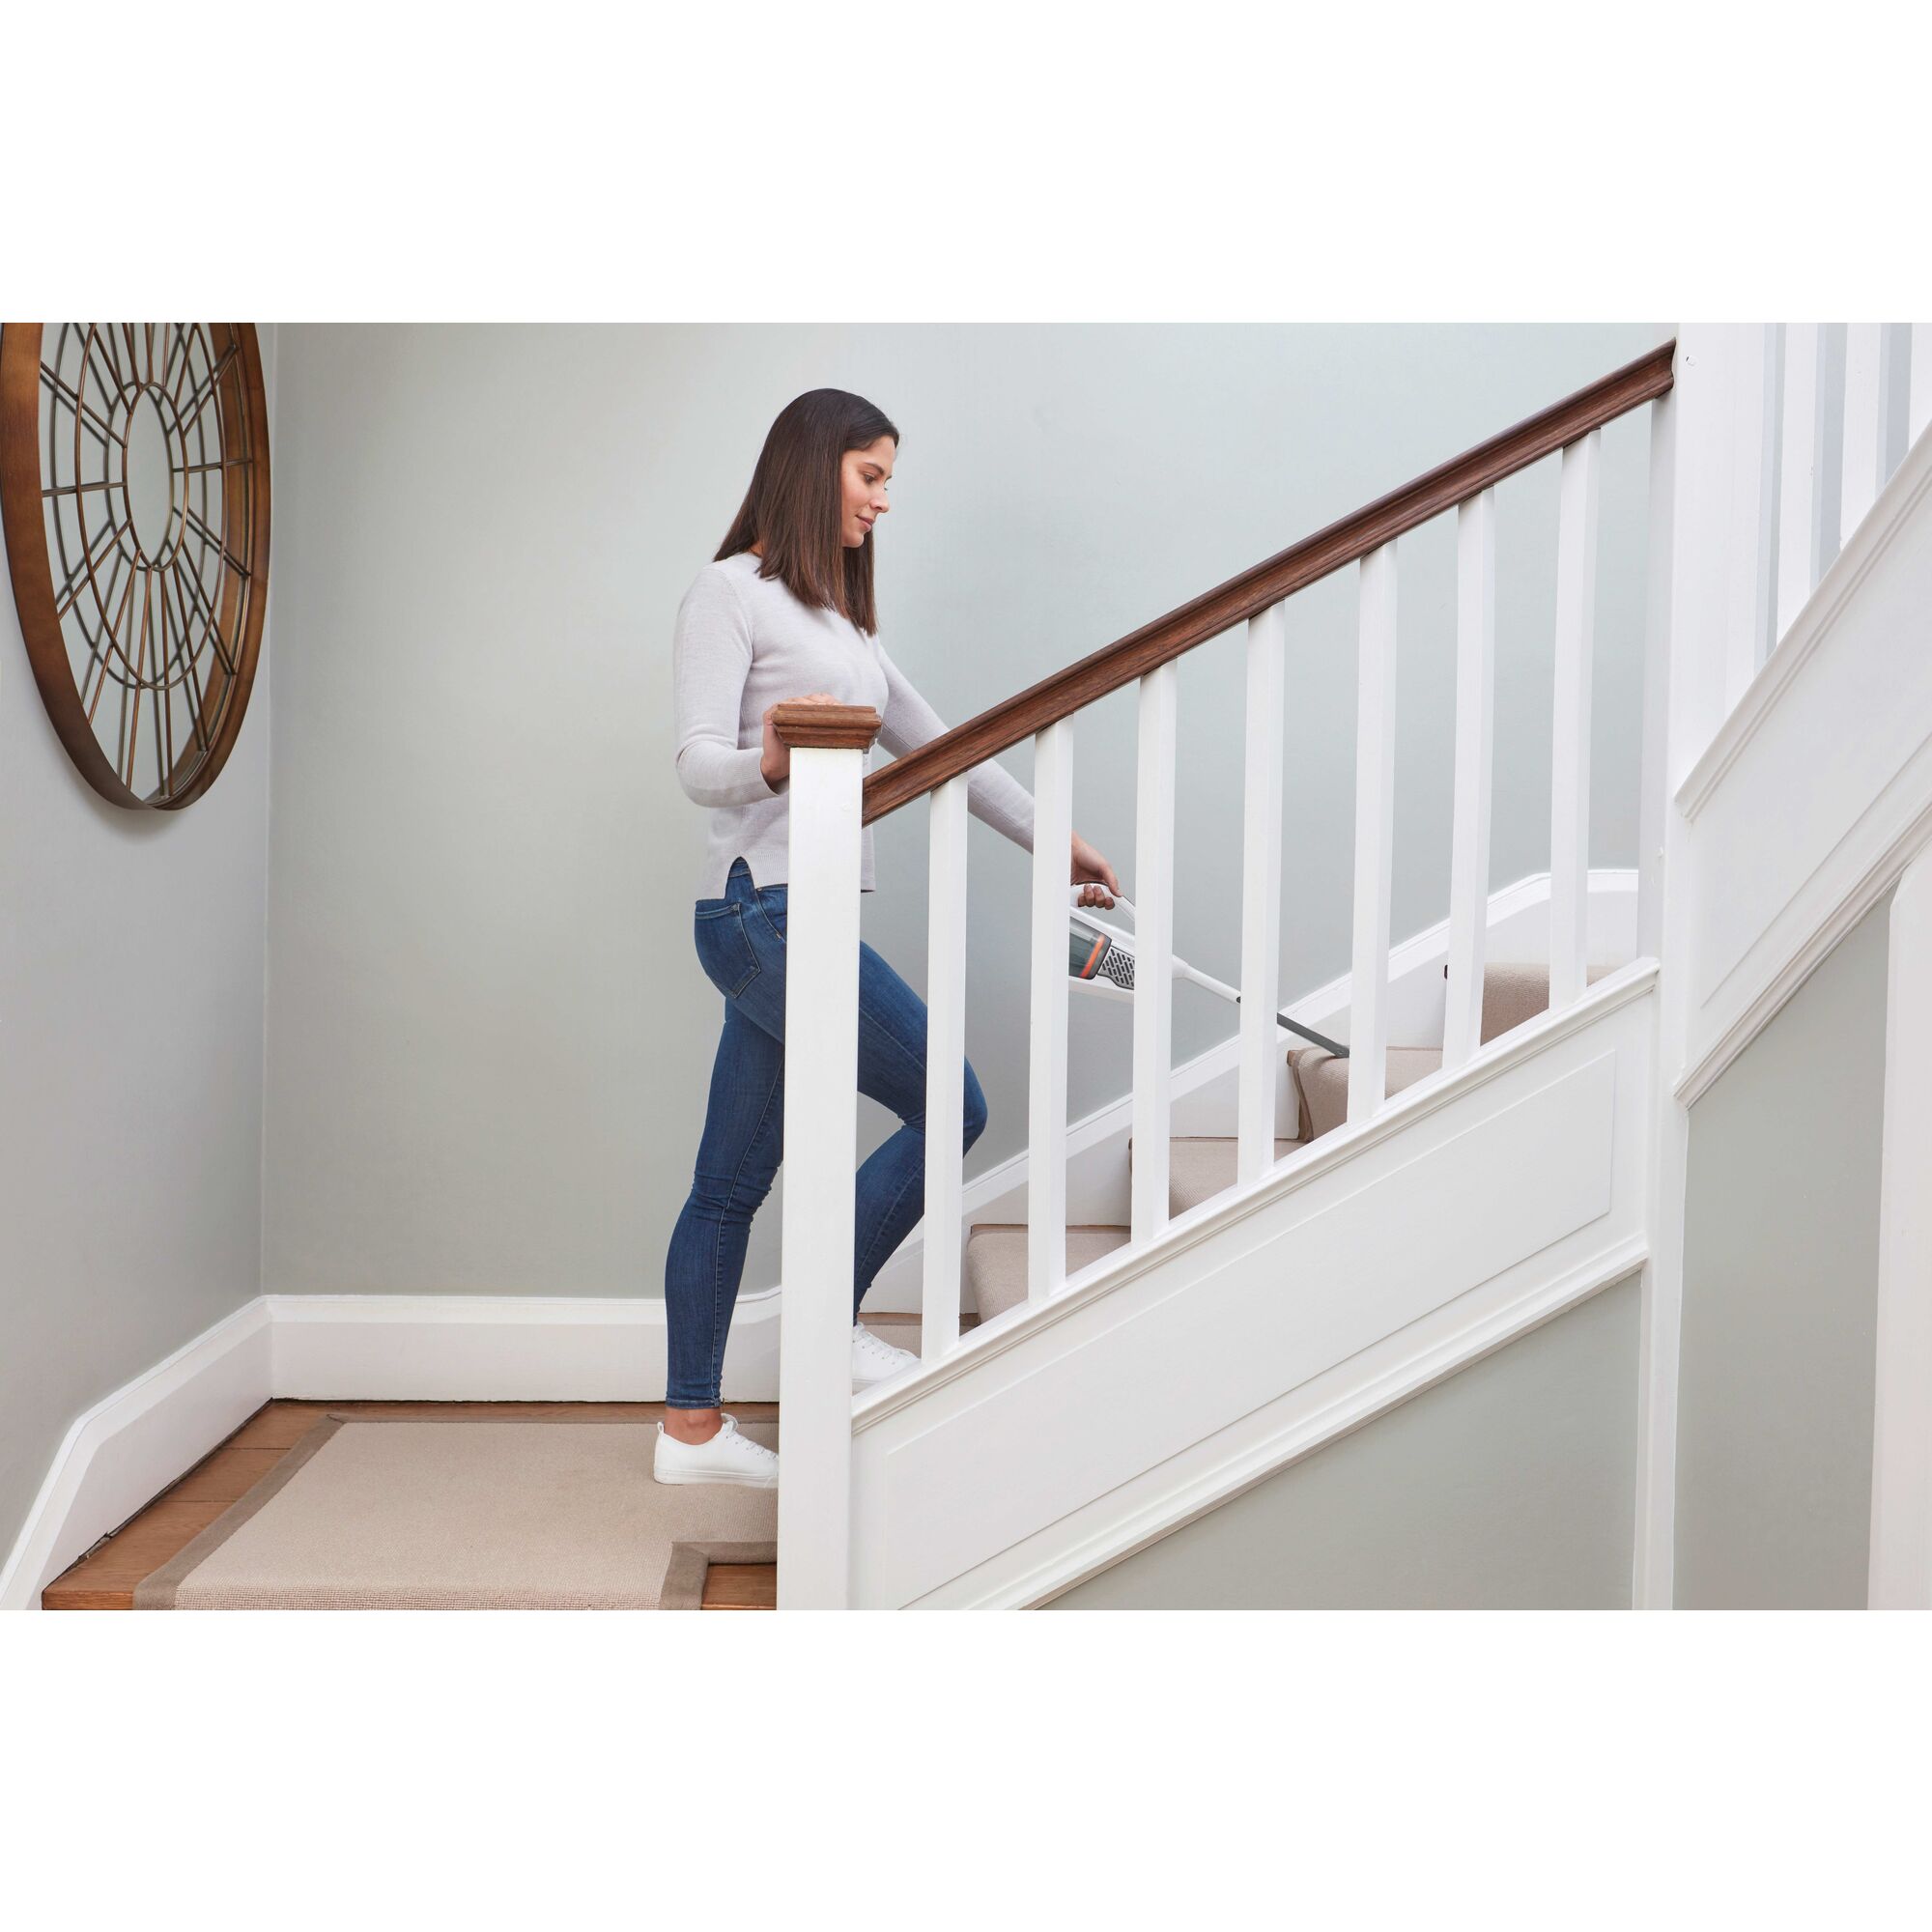 Dustbuster advanced clean plus cordless hand vacuum being used by a person to clean stairs.